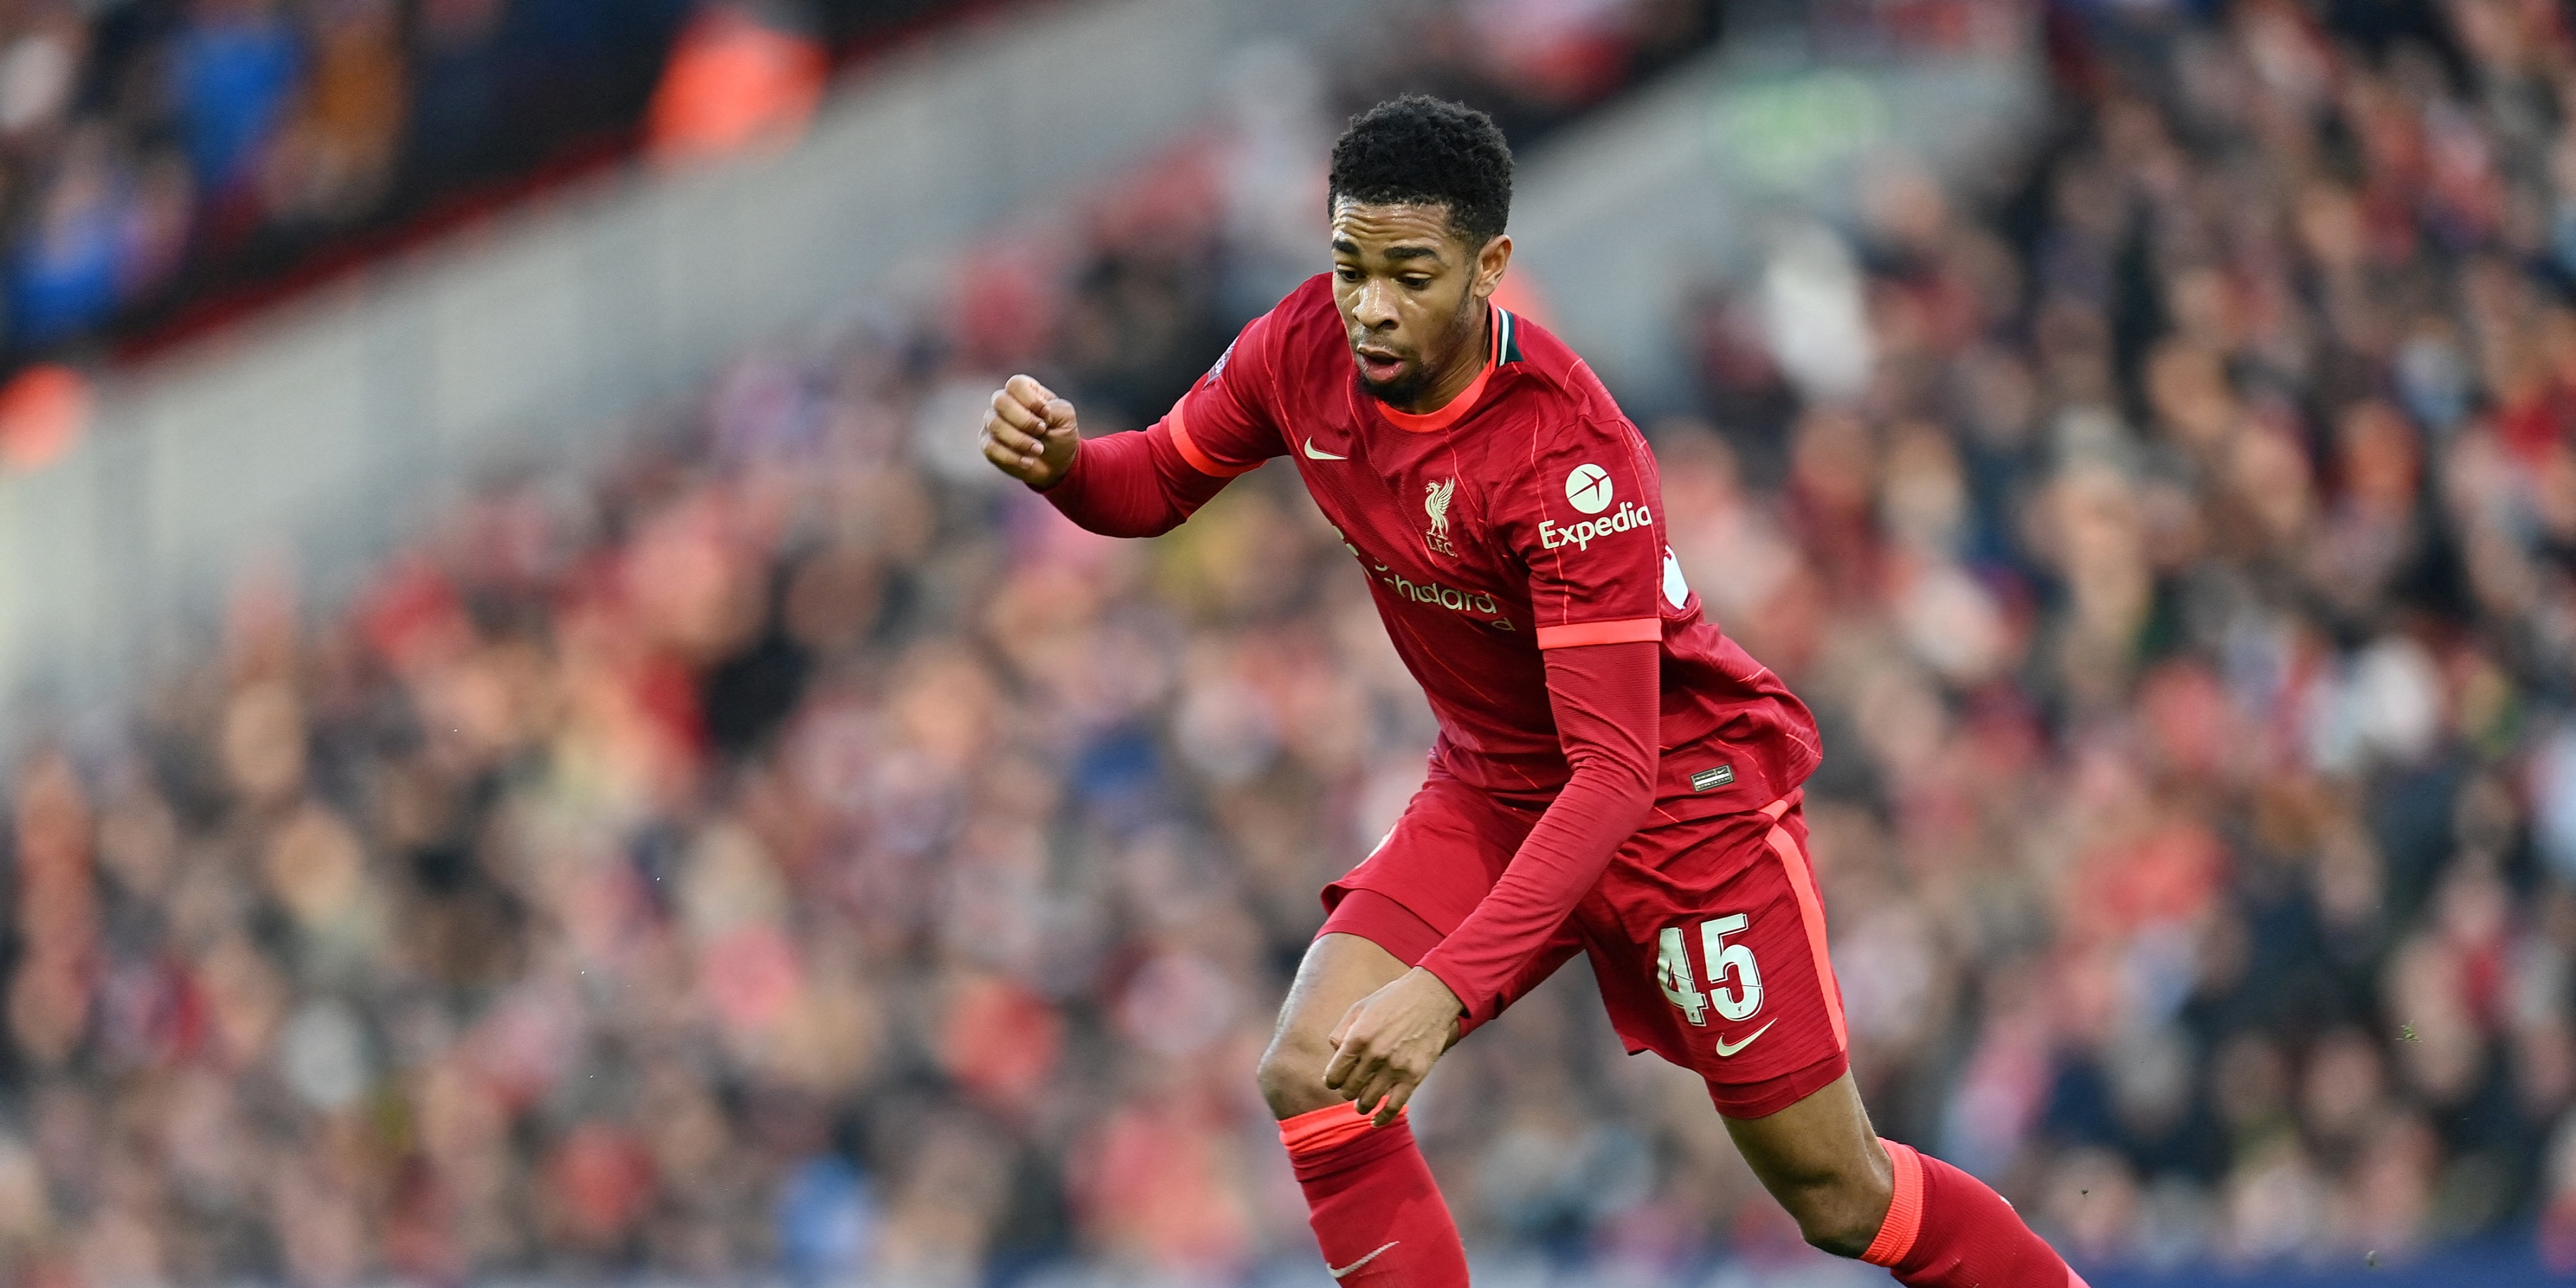 Two Liverpool youngsters may have impressed Klopp after what they did following Gordon equaliser, suggests Caoimhe O’Neill